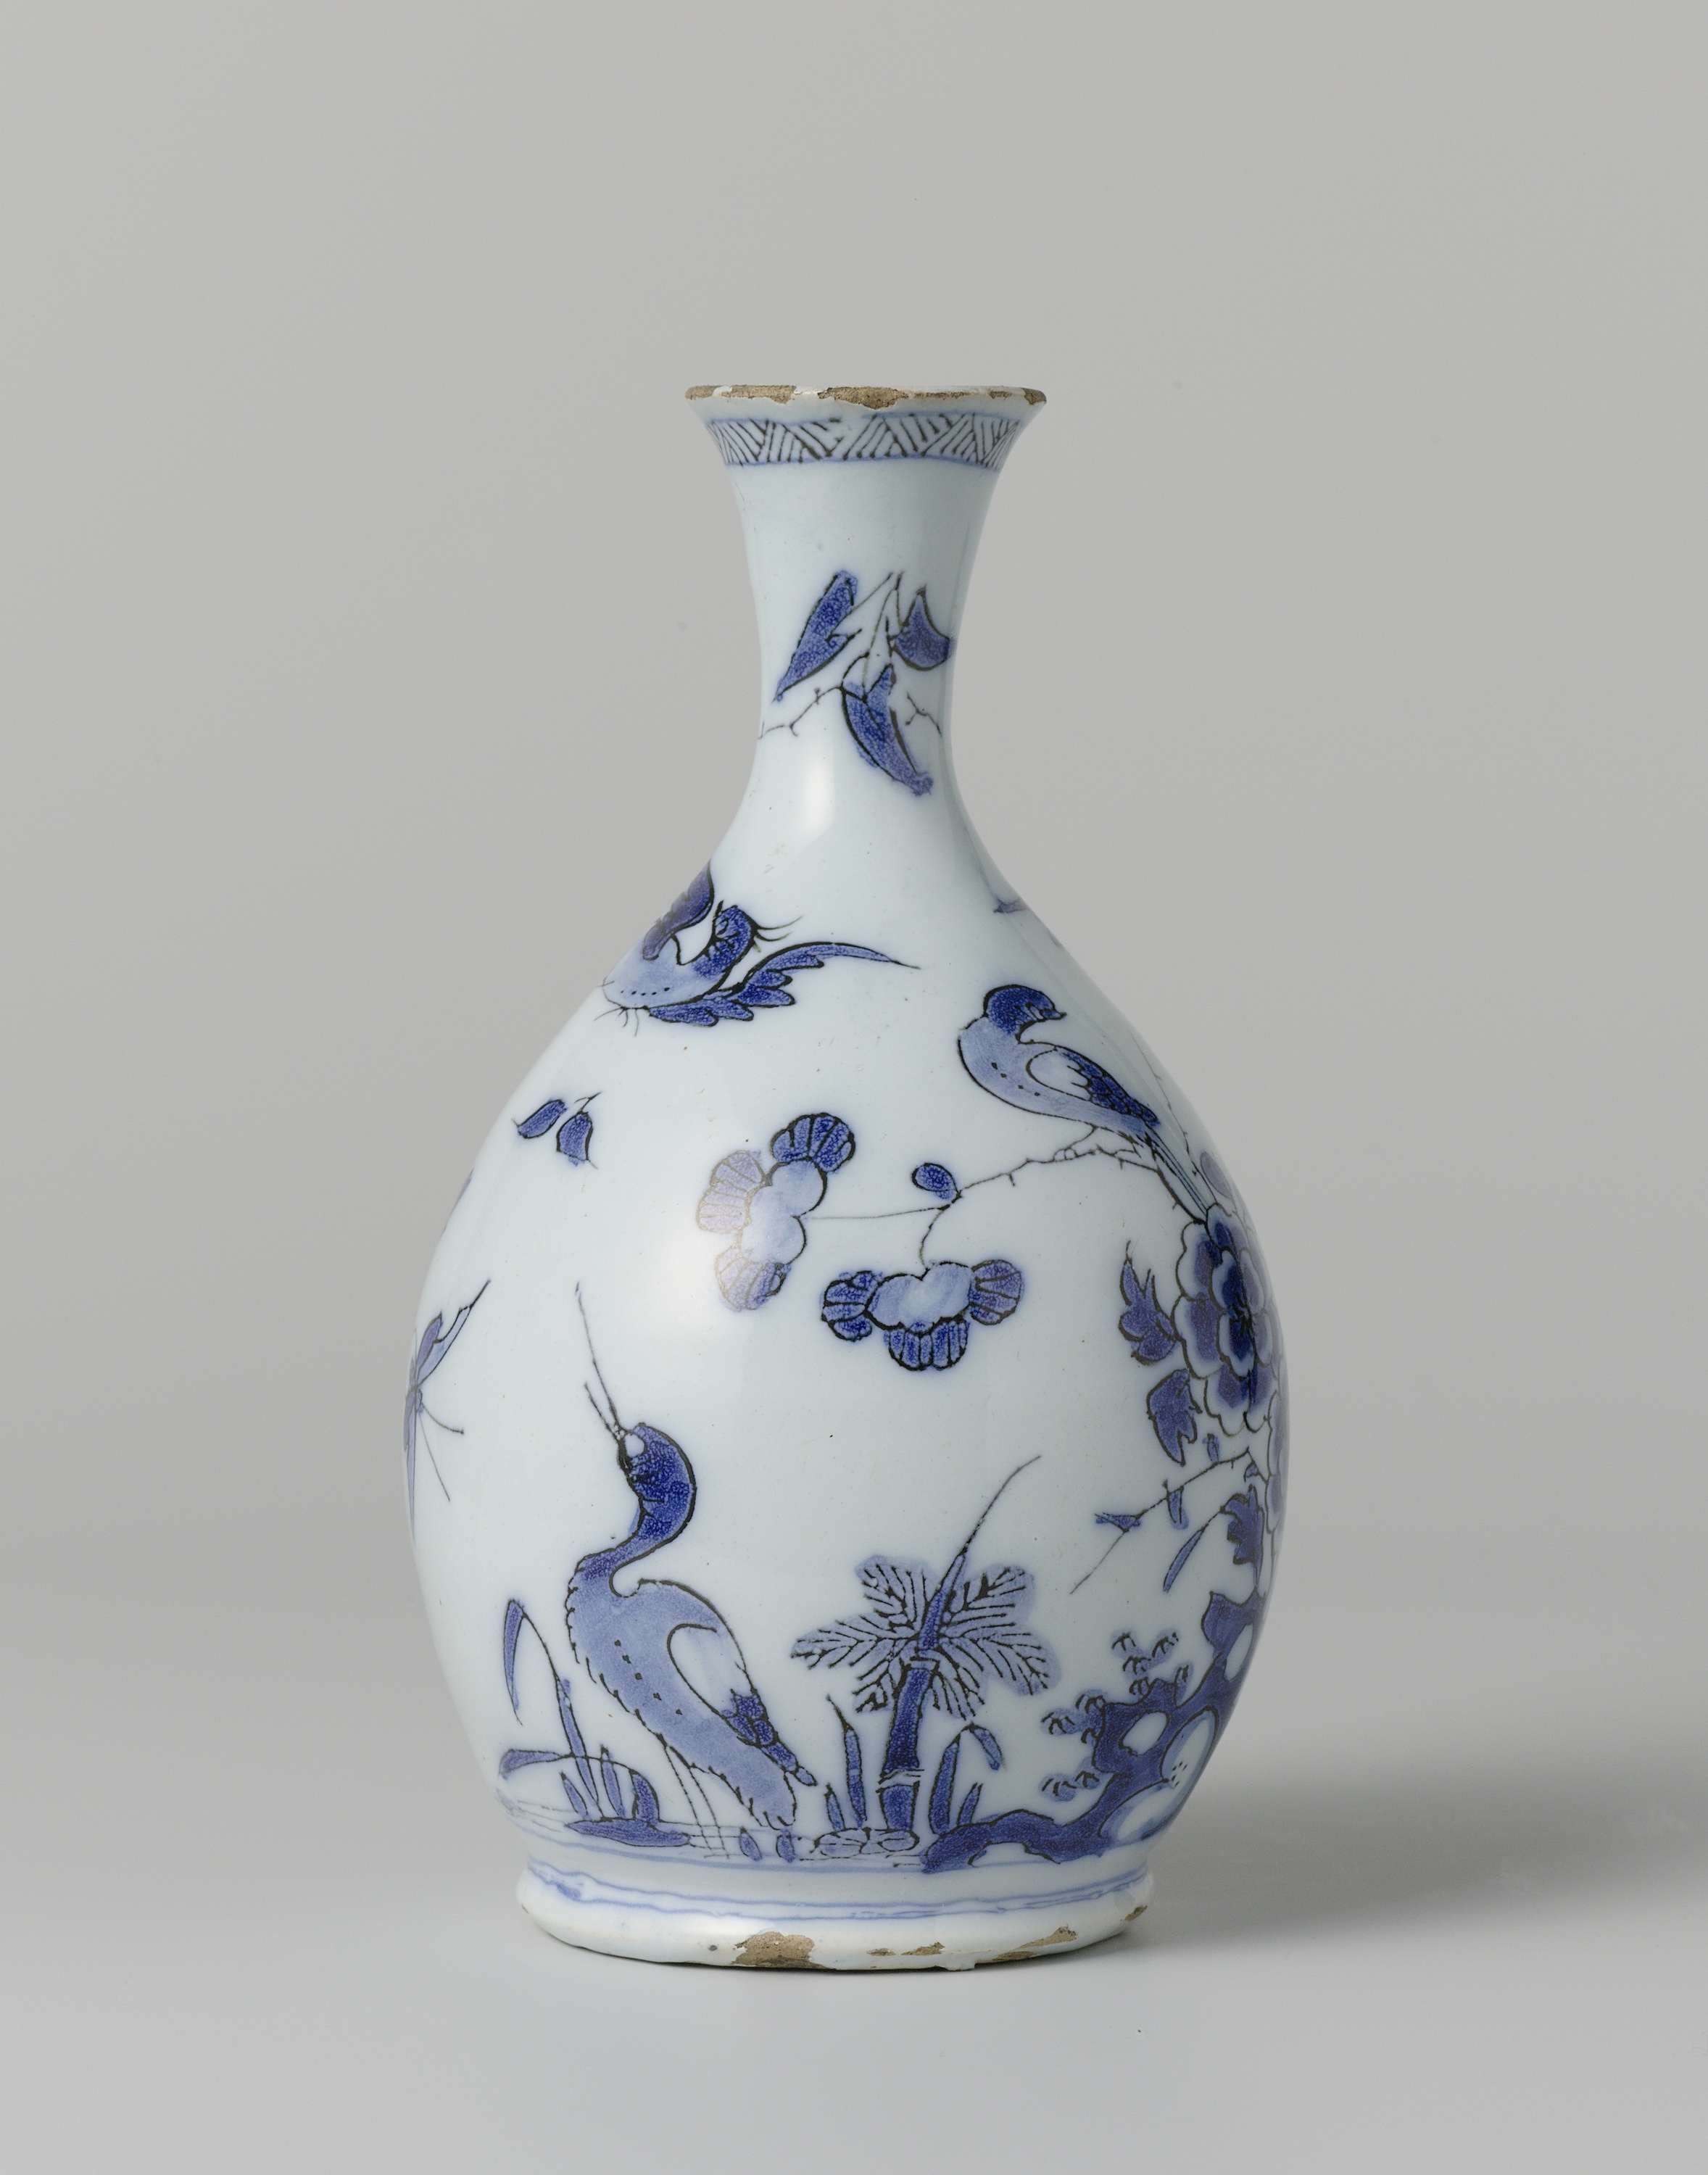 28 Spectacular Royal Delft Vase 2024 free download royal delft vase of het moriaanshooft vase het moriaanshooft rochus jacobsz for hoppesteijn place delft dating c 1685 c 1690 faience vase with the chinese porcelain inspired flowers